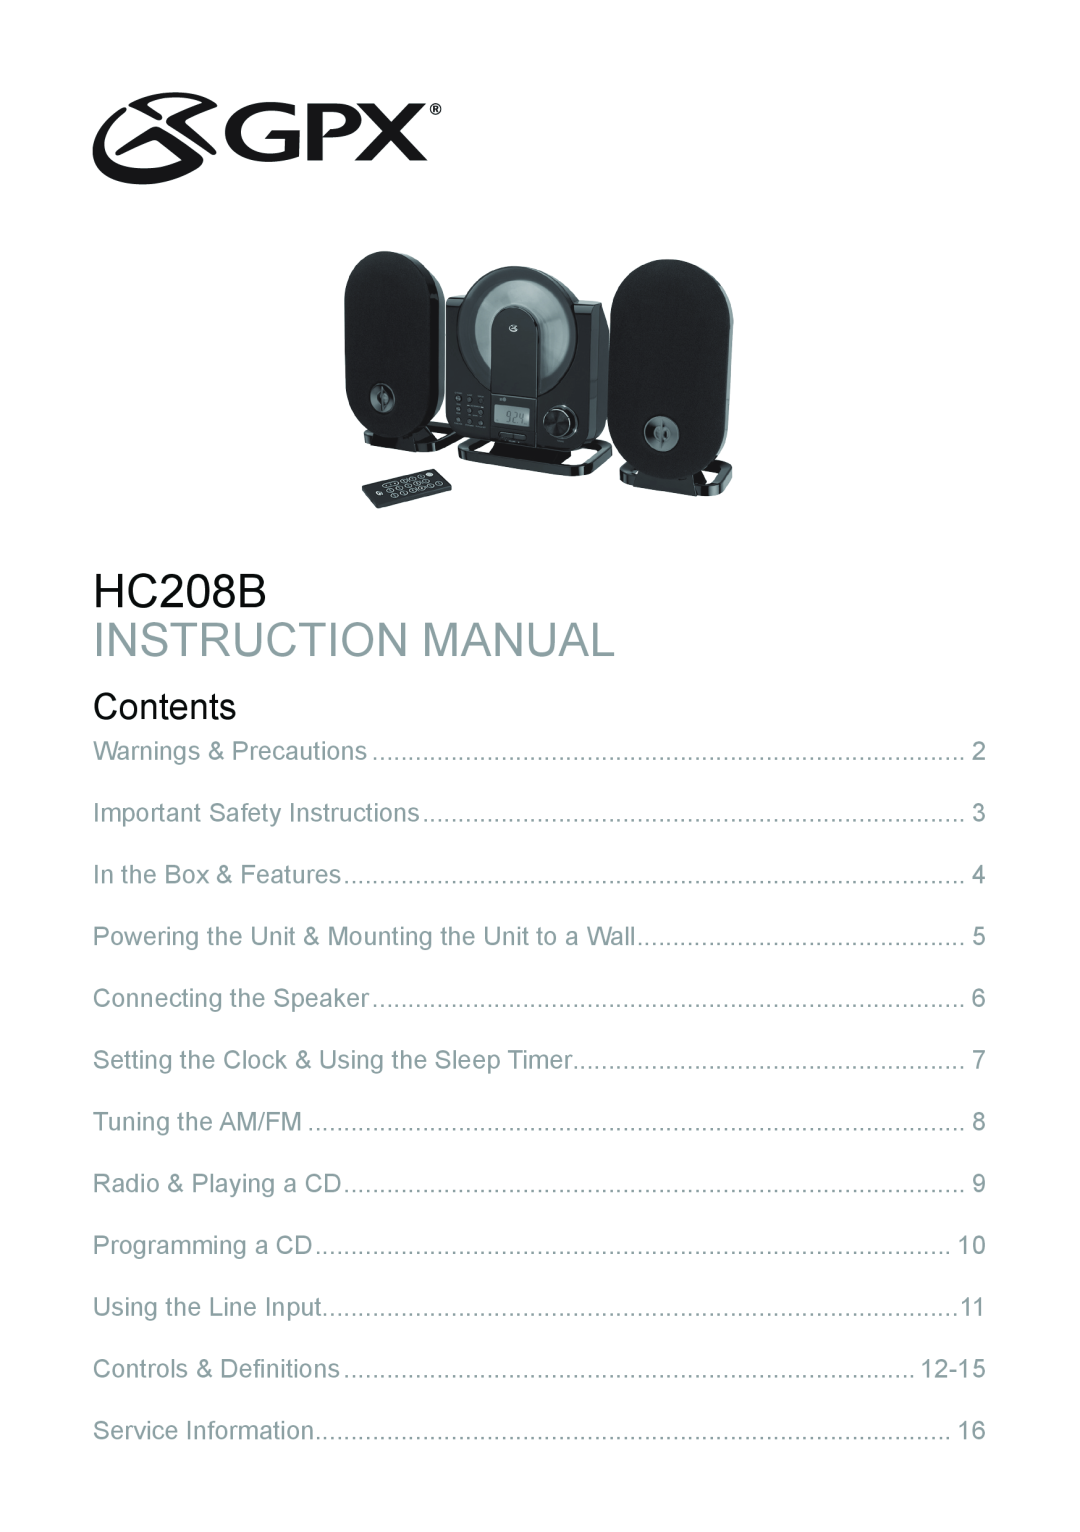 GPX HC208B instruction manual Contents, 12-15 